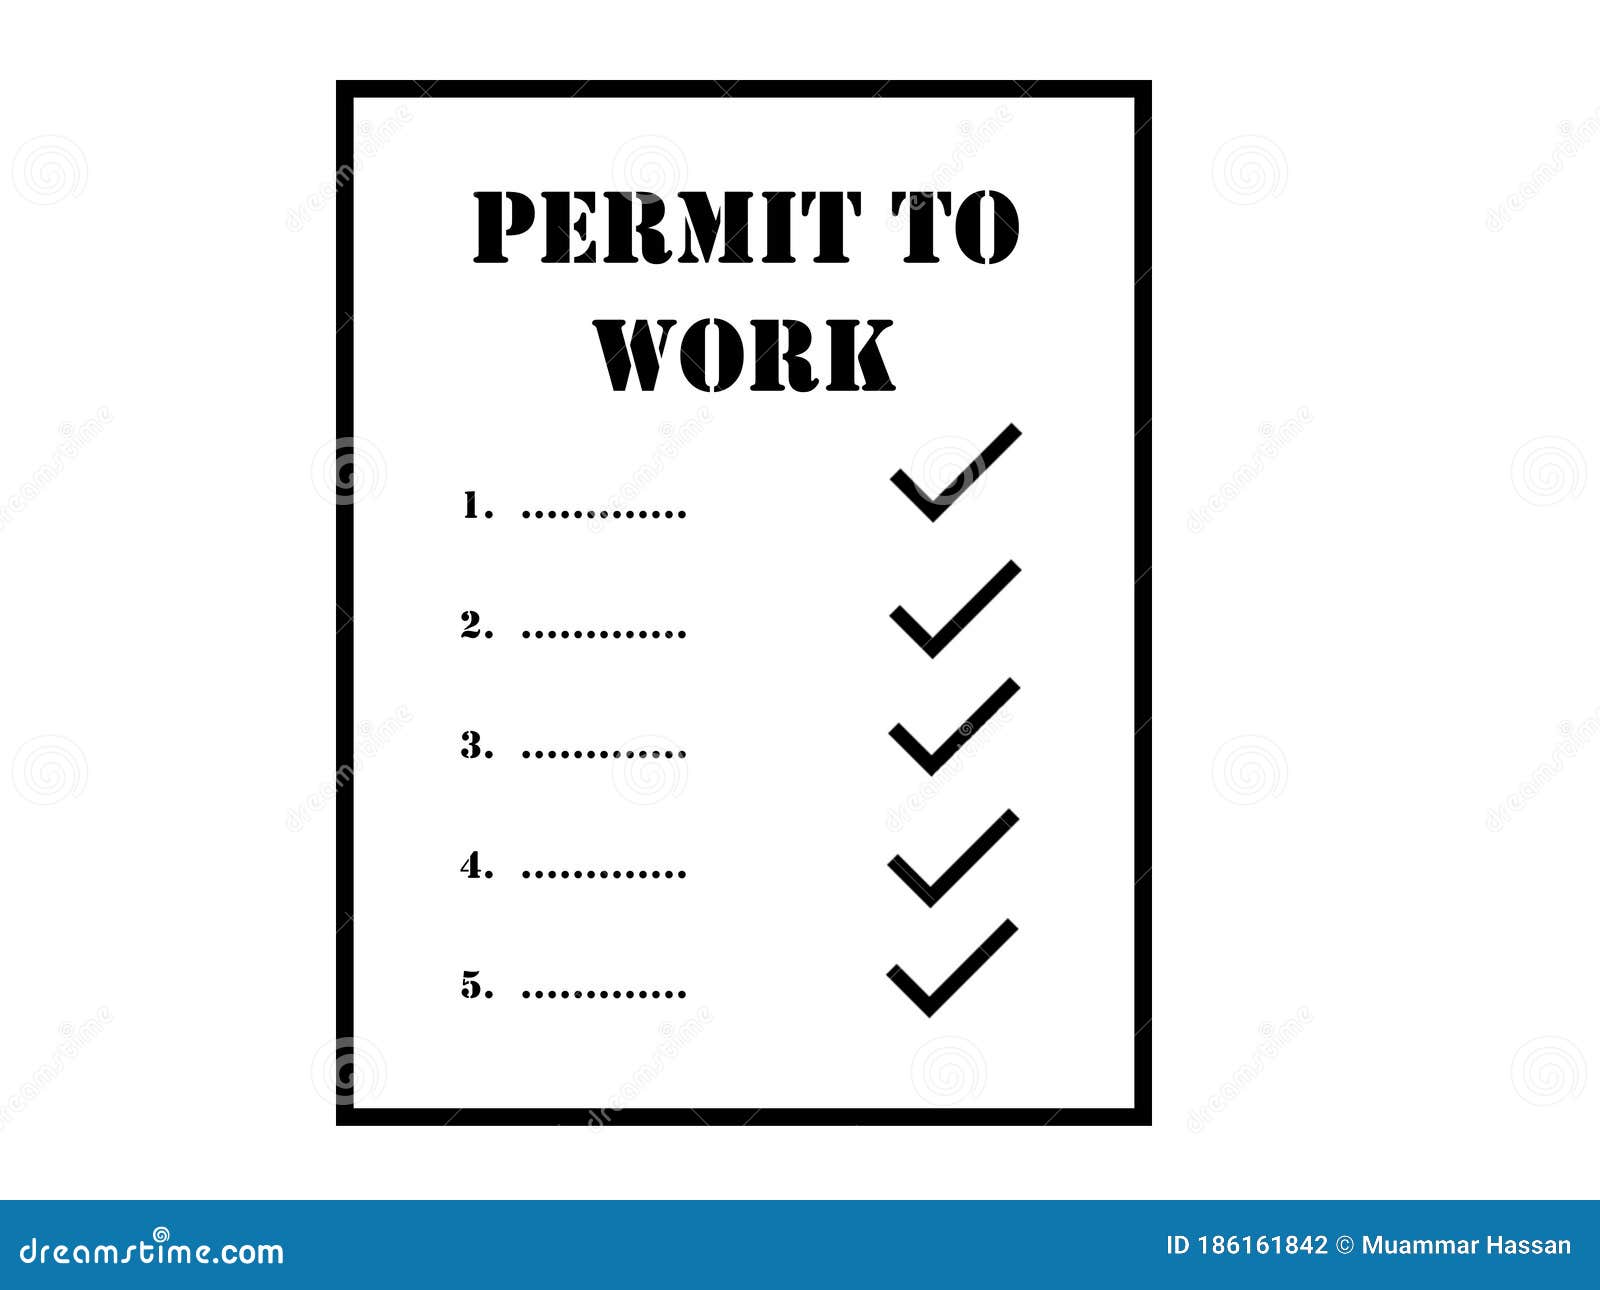 permit-to-work ptw refers to management systems used to ensure that work is done safely and efficiently.